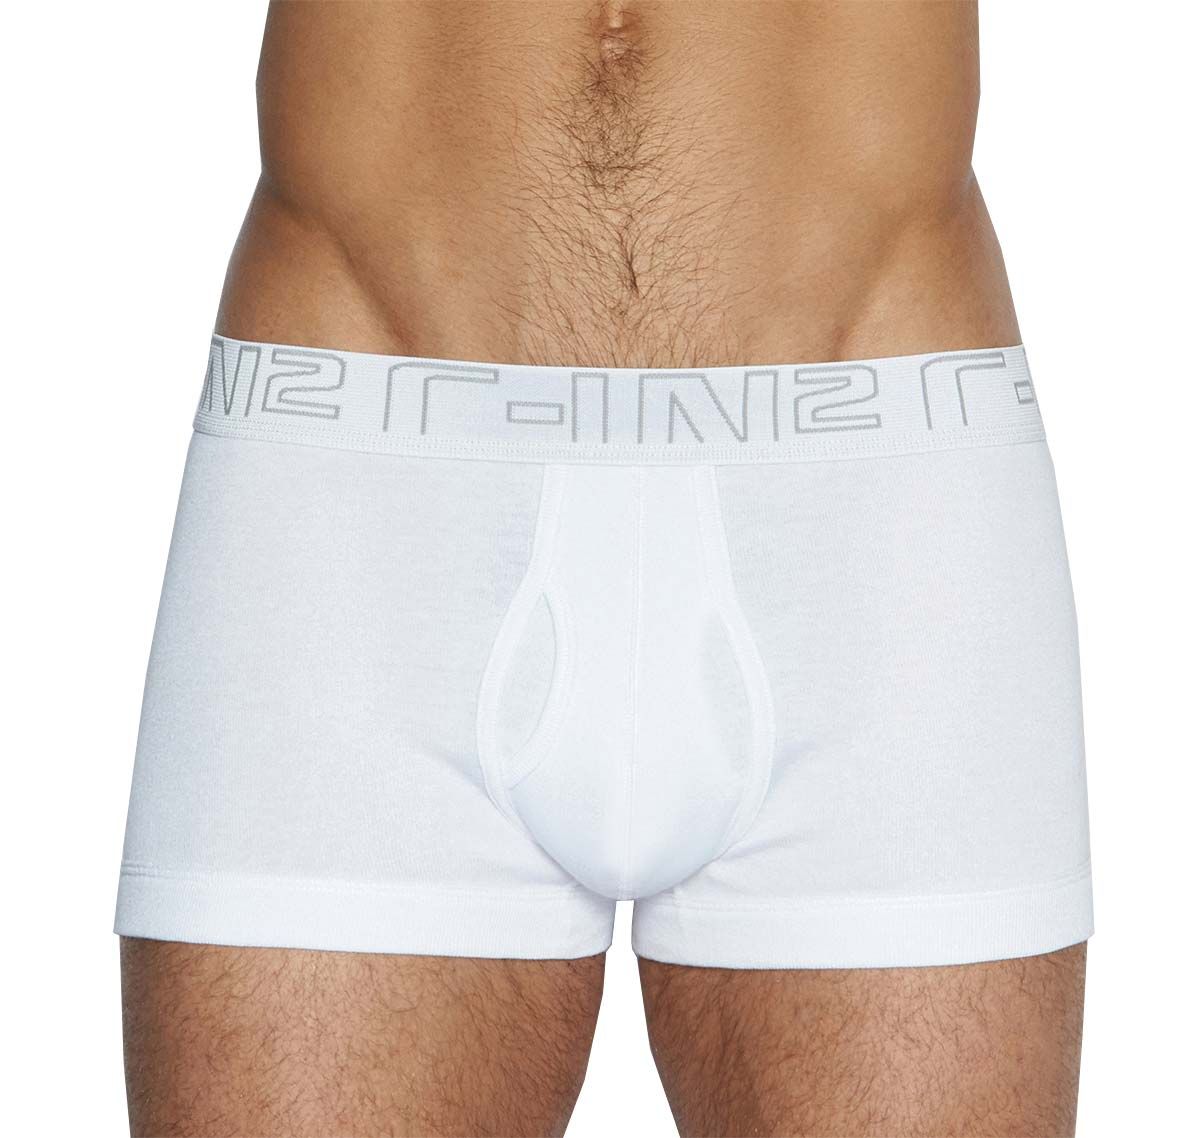 C-IN2 Pack of 3 Boxers MULTIPACK3 TRUNKS 1323-100, white